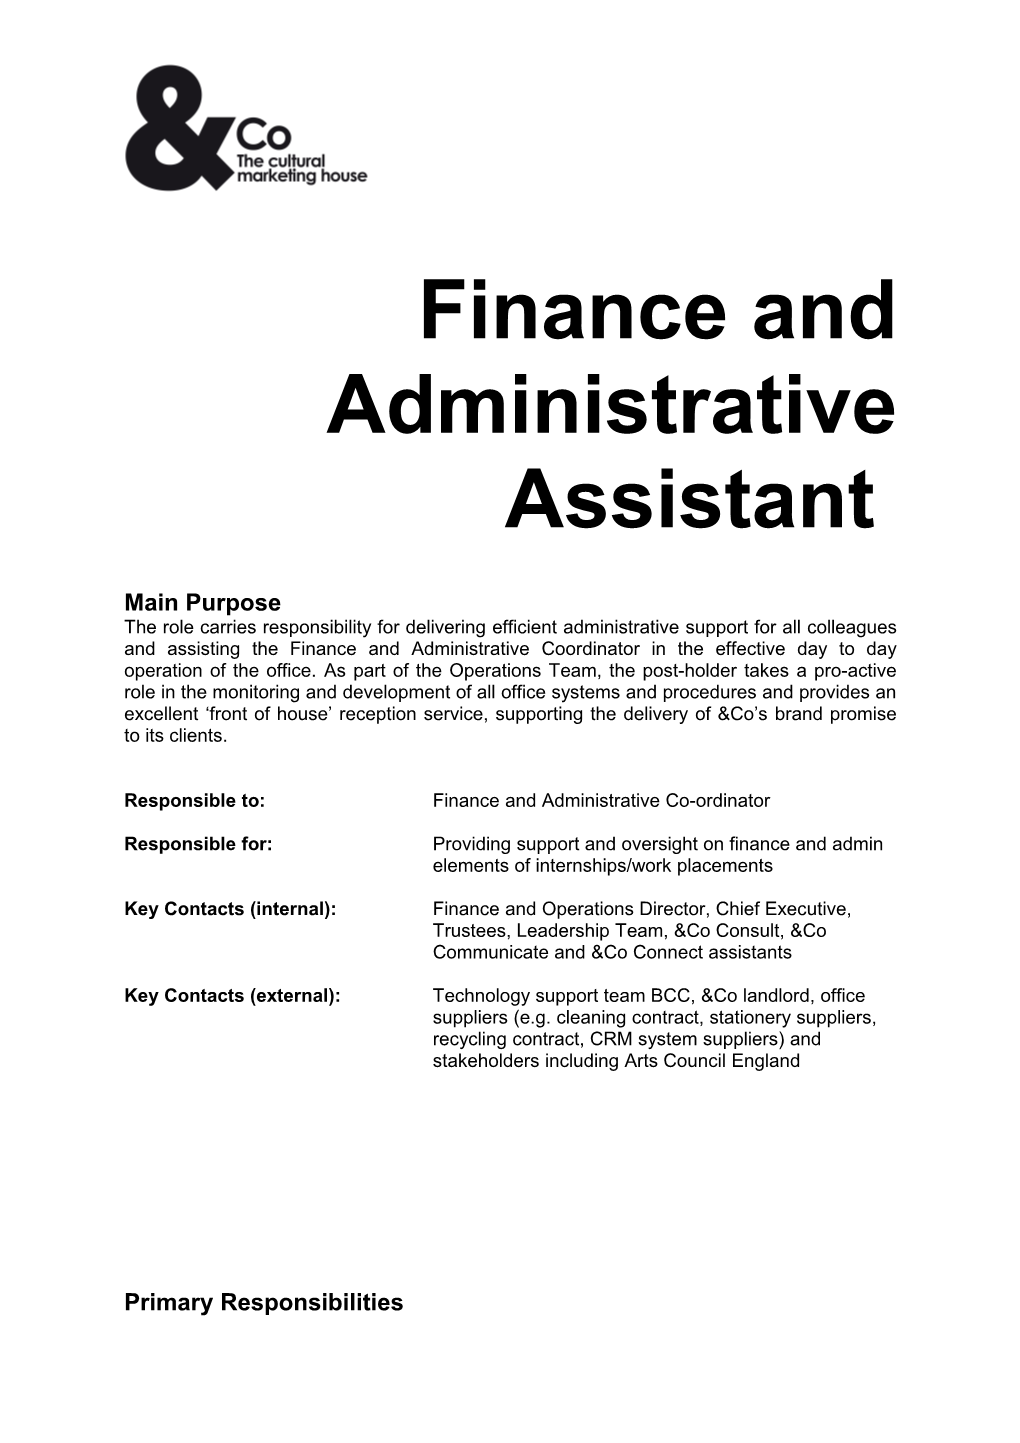 Finance and Administrative Assistant